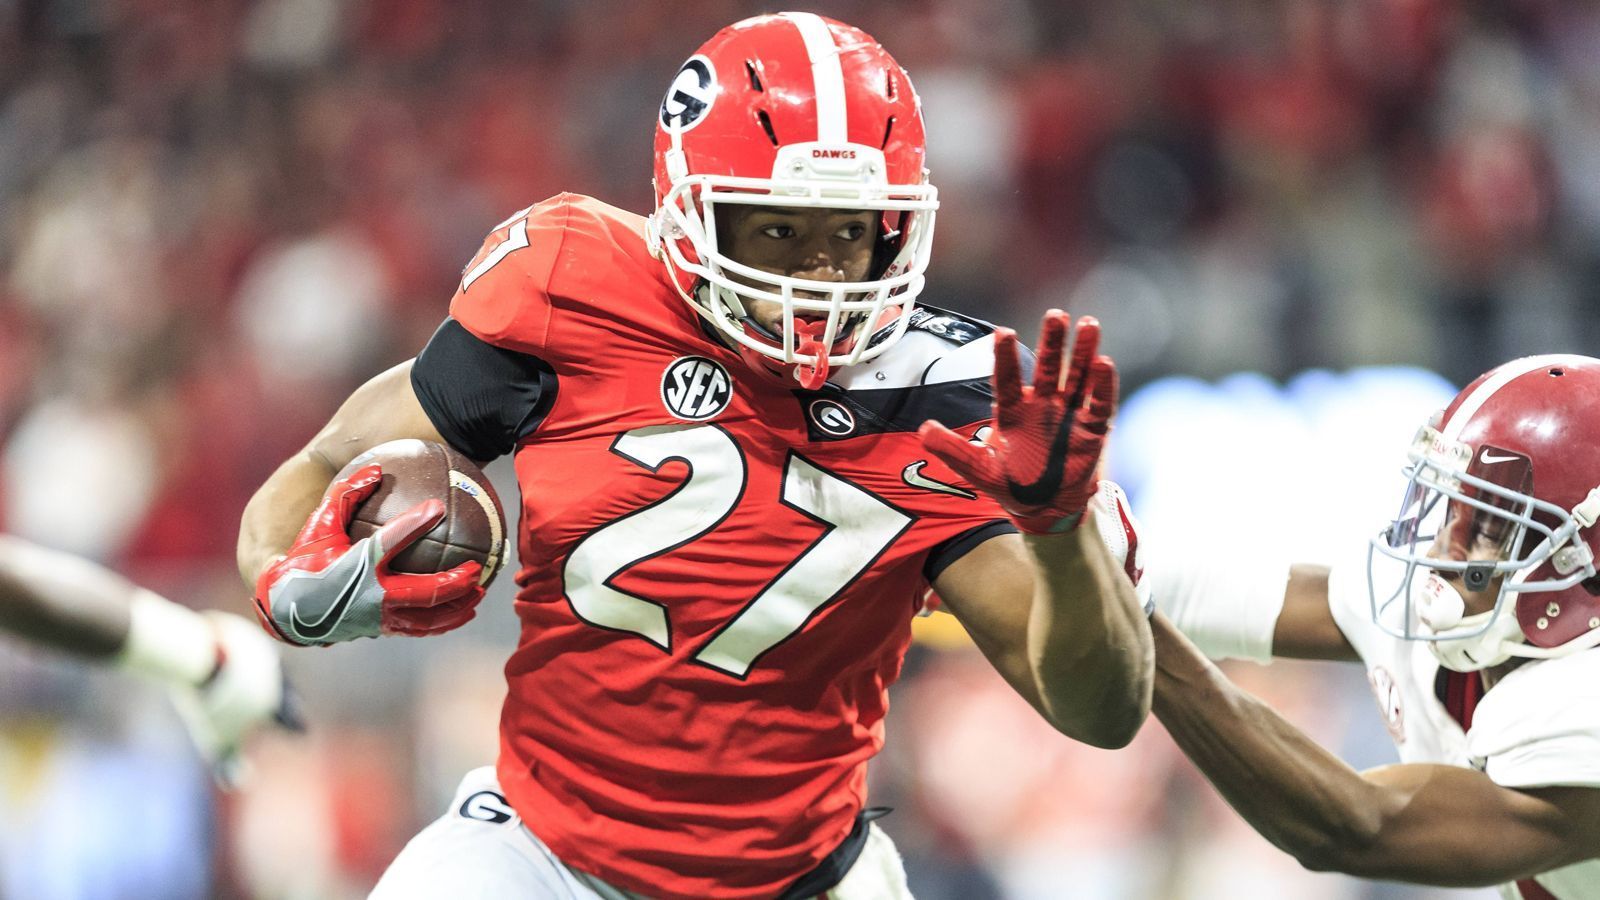 
                <strong>Nick Chubb (Cleveland Browns)</strong><br>
                College: Georgia BulldogsPosition: Running BackJahre am College: 4College-Stats: 4769 Rushing Yards - 44 Rushing Touchdowns - 6,3 Yards/LaufGedrafted: 2018 an 35. Stelle von den Cleveland Browns
              